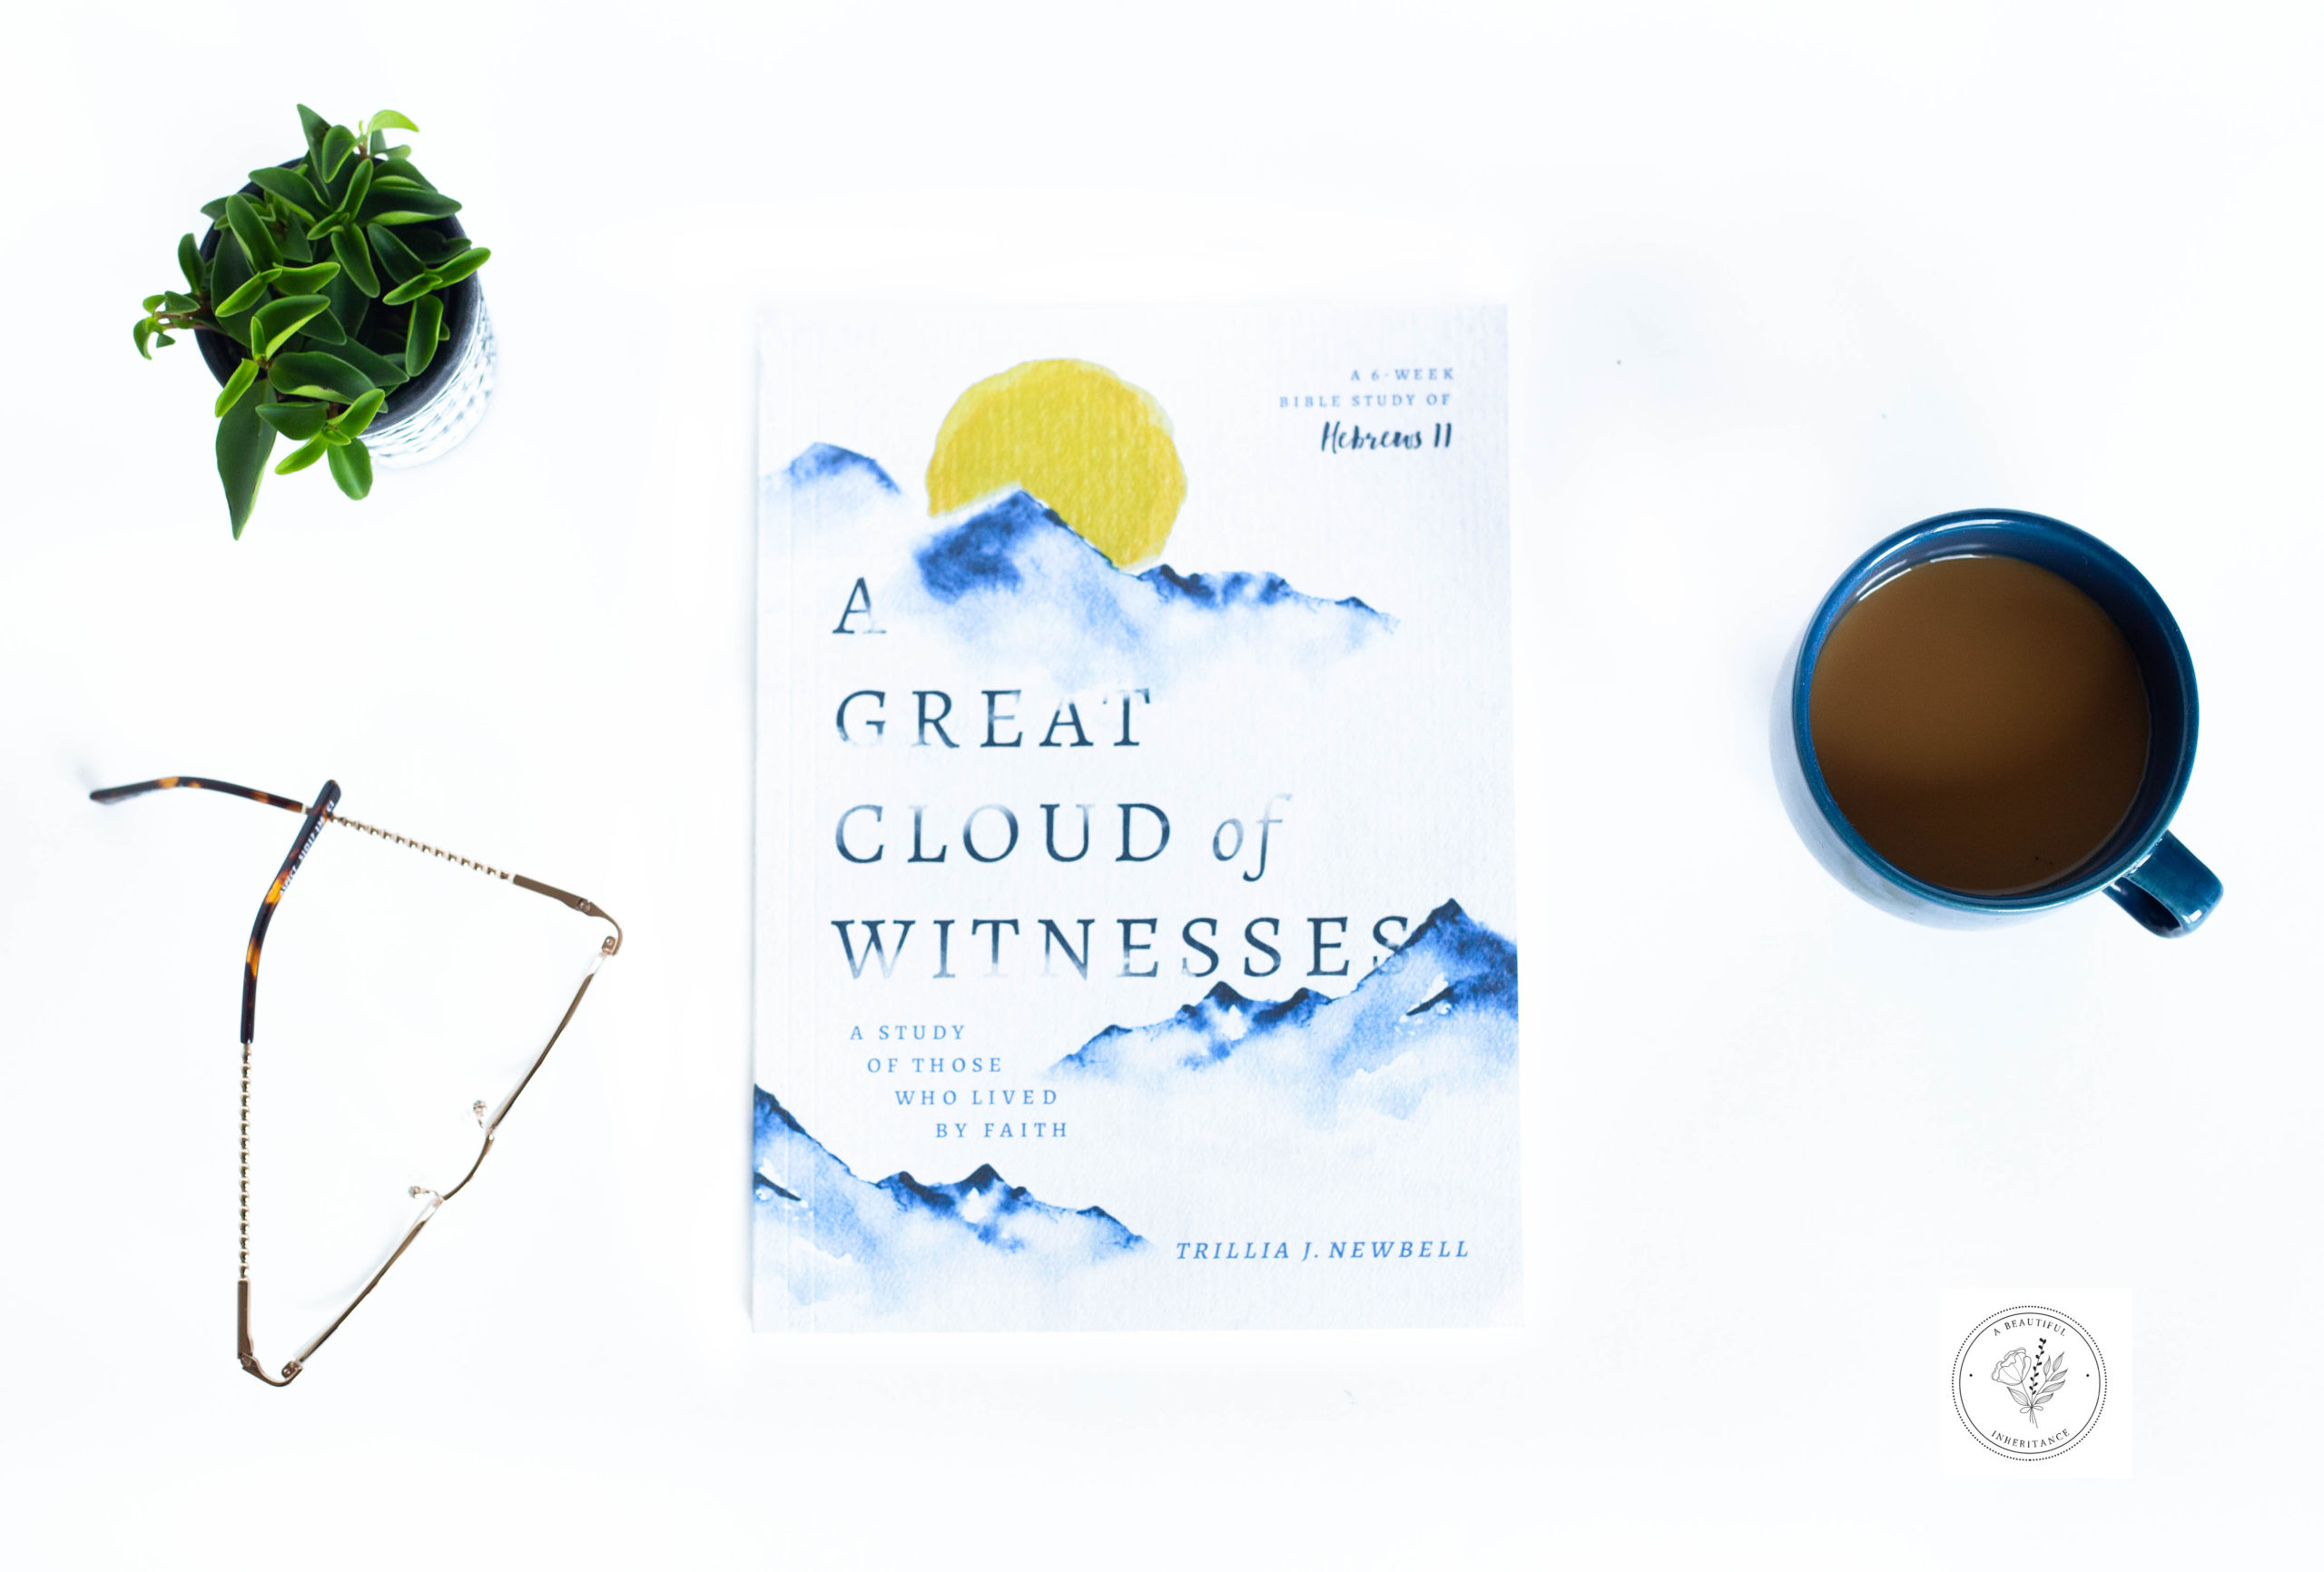 A Great Cloud of Witnesses